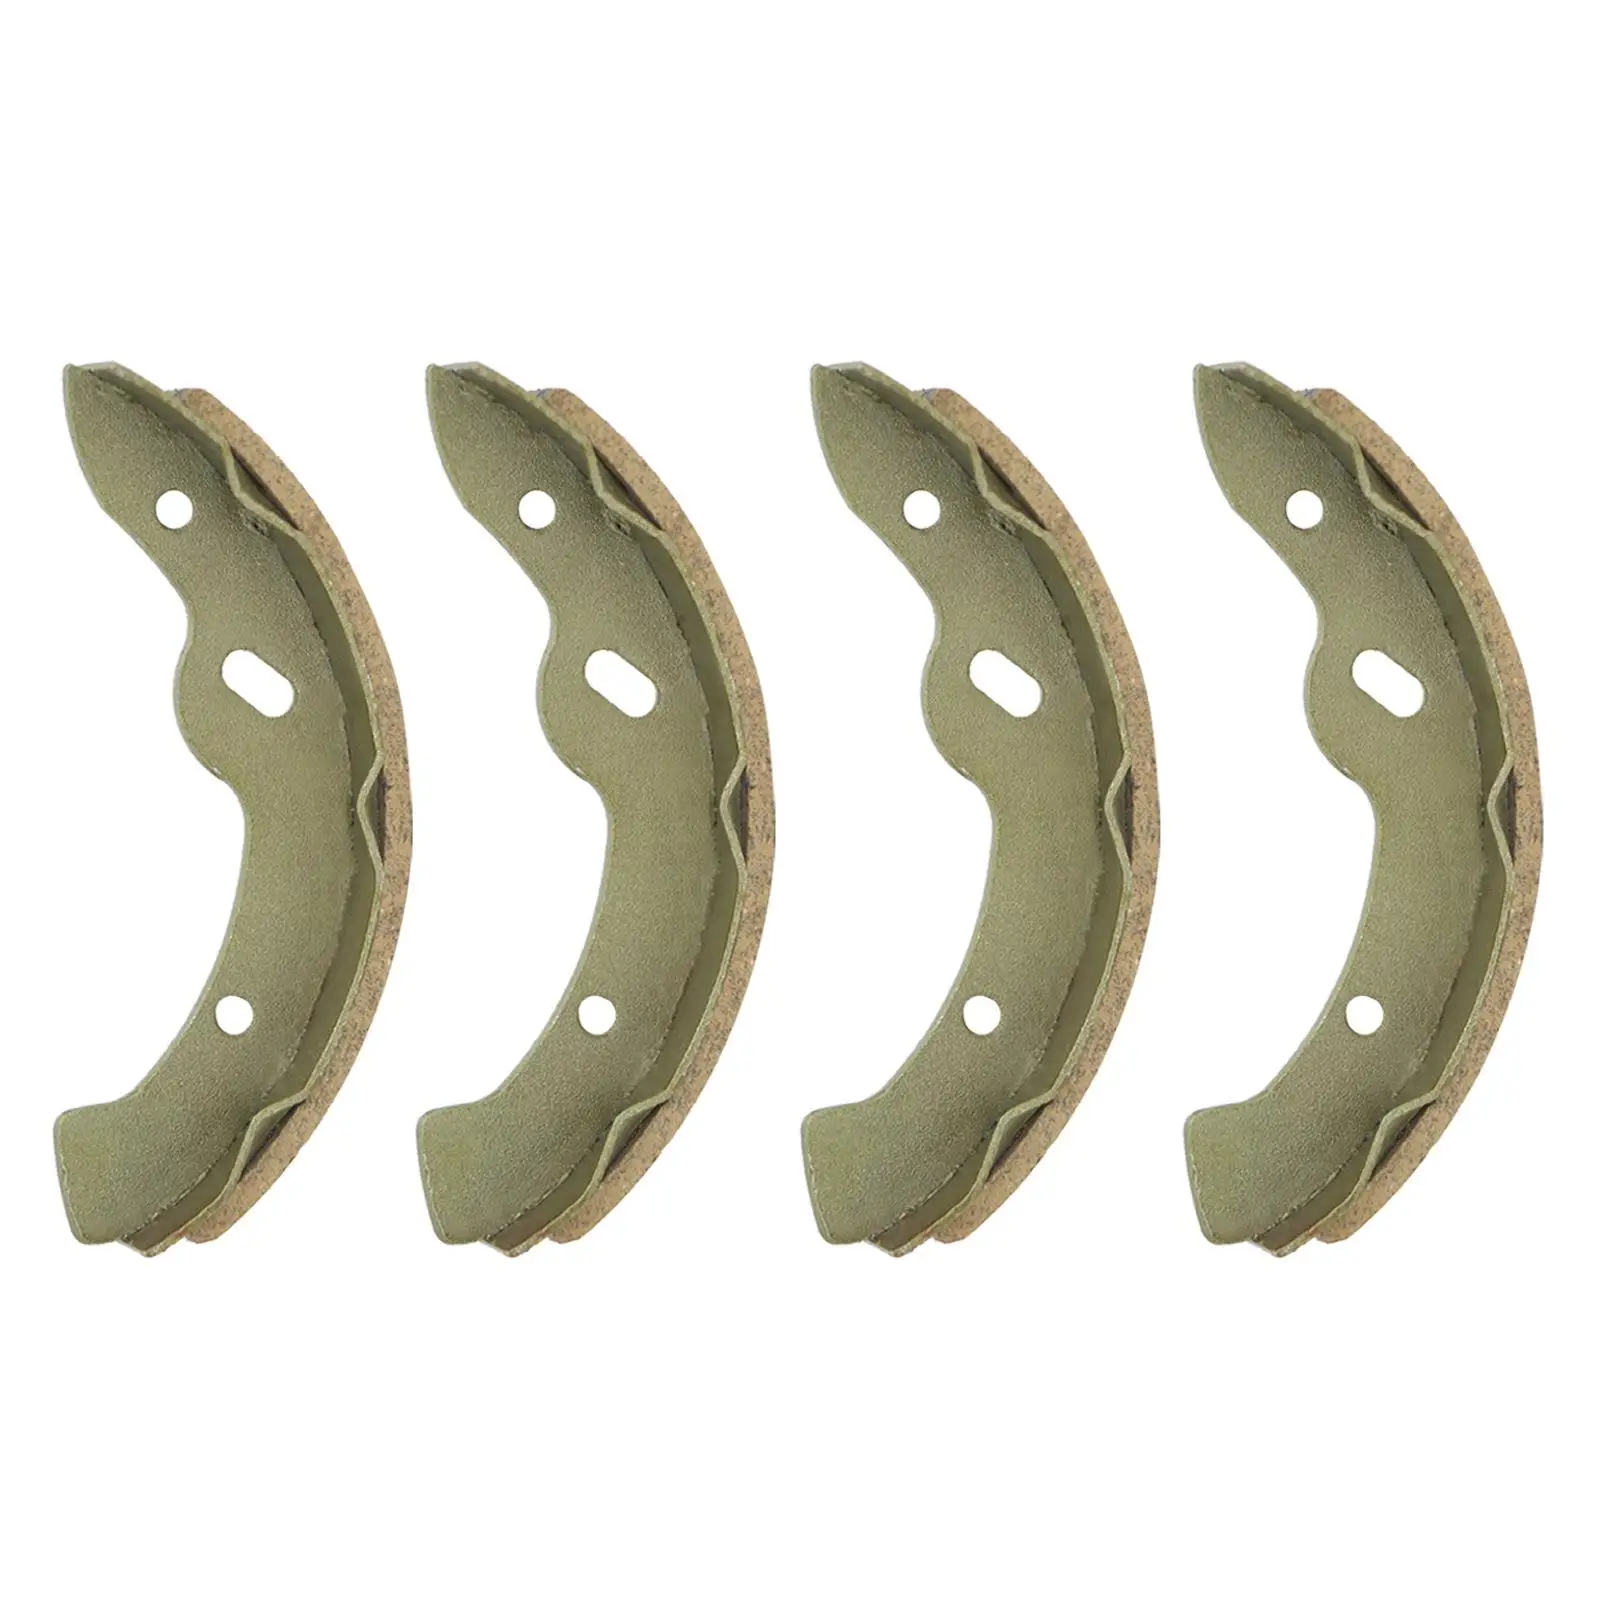 

Electric Golf Cart Brake Shoes Brake Hardware 1997-Up 4Pcs Lightweight Replacement Gas Electric Parts Durable for Ezgo 70794-G01